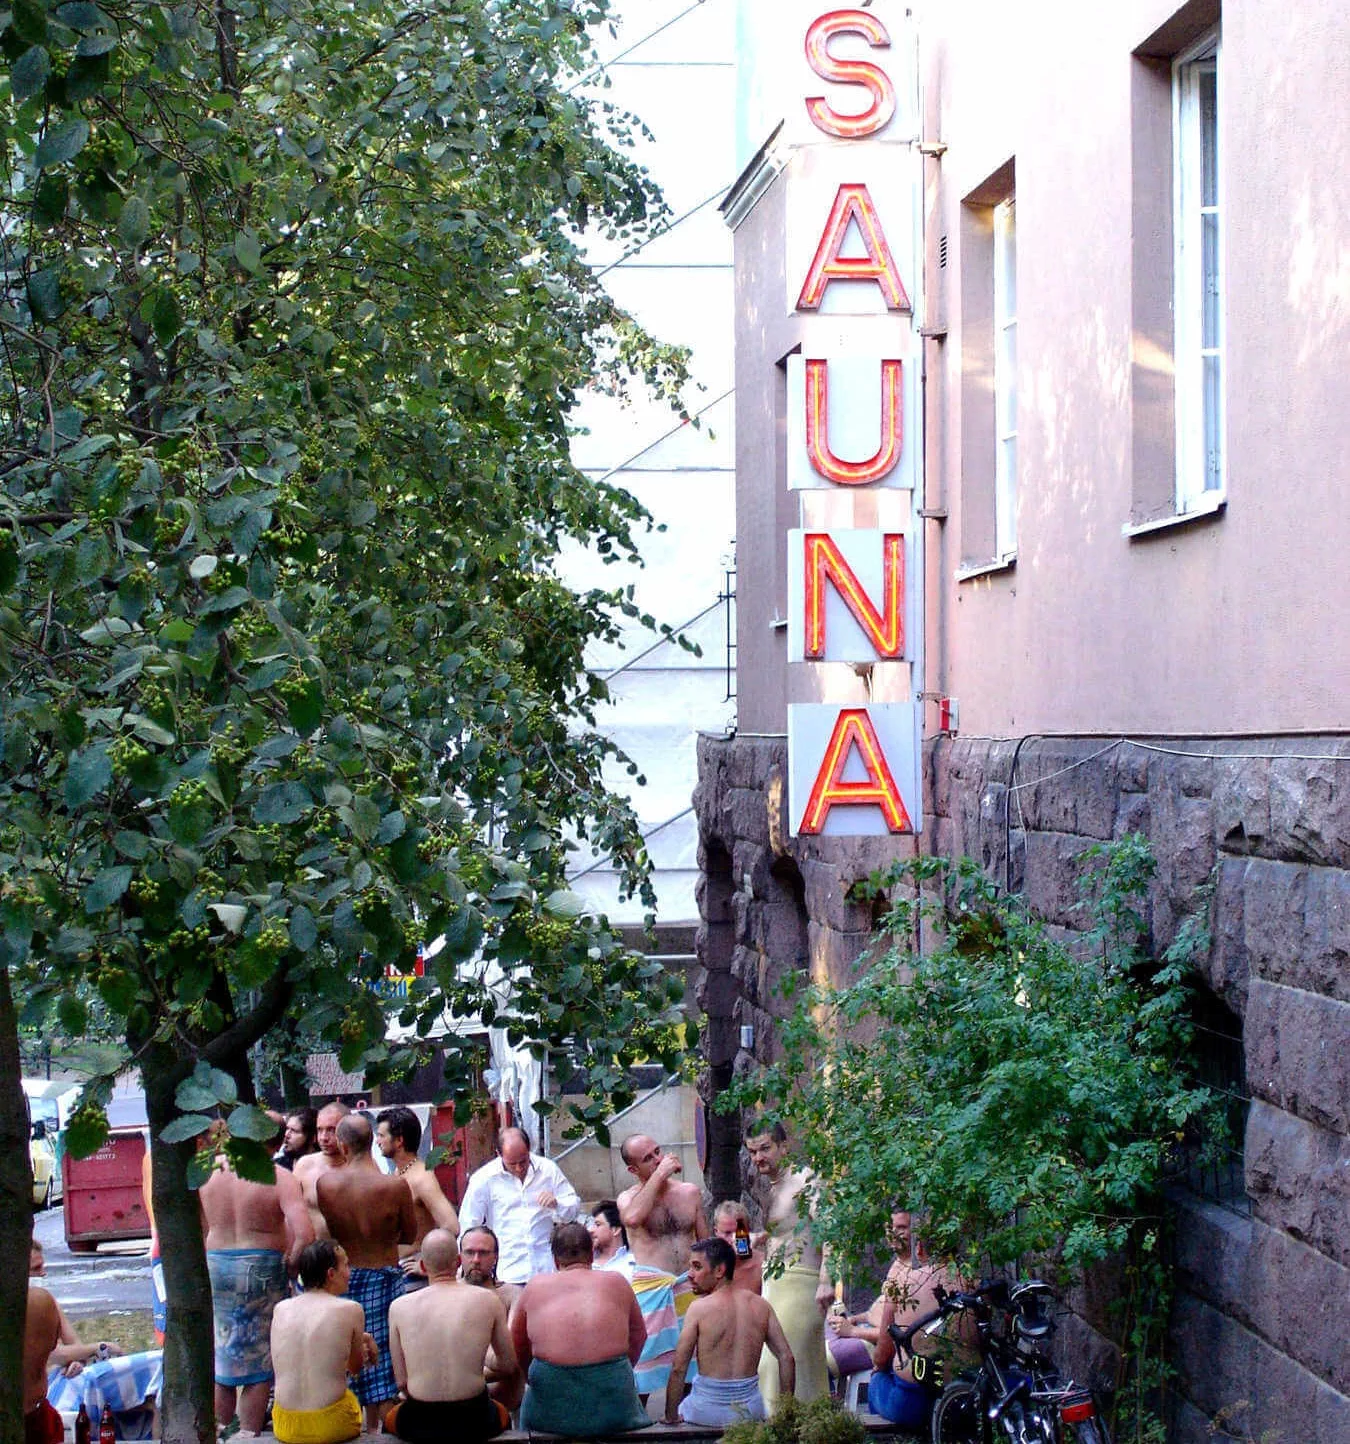 Men relax inside — and outside of — this sauna in Helsinki